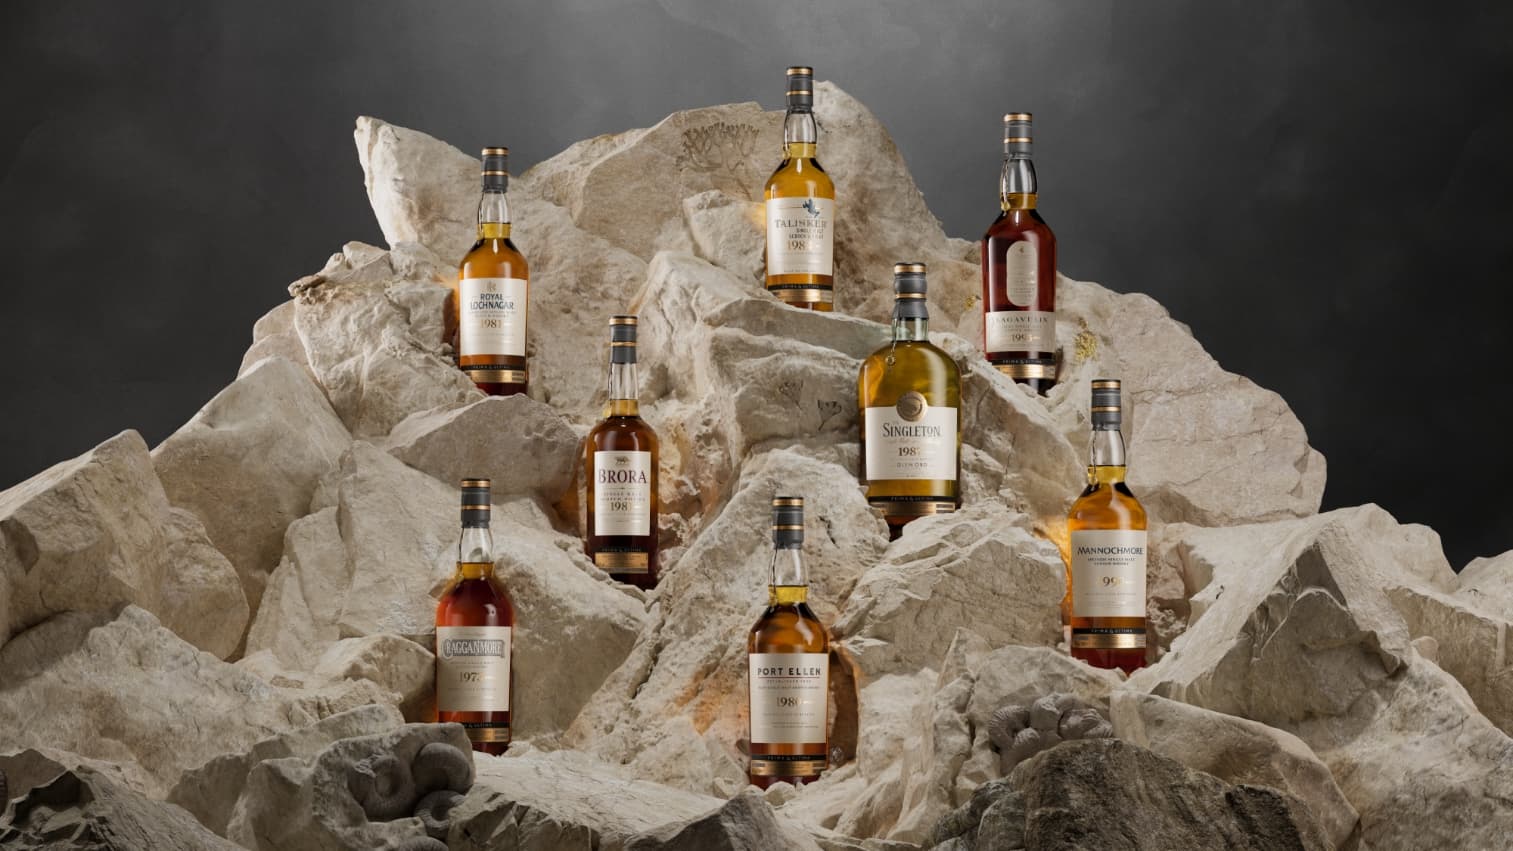 The collection of Prima and ultima third release bottles set against a natural stone background